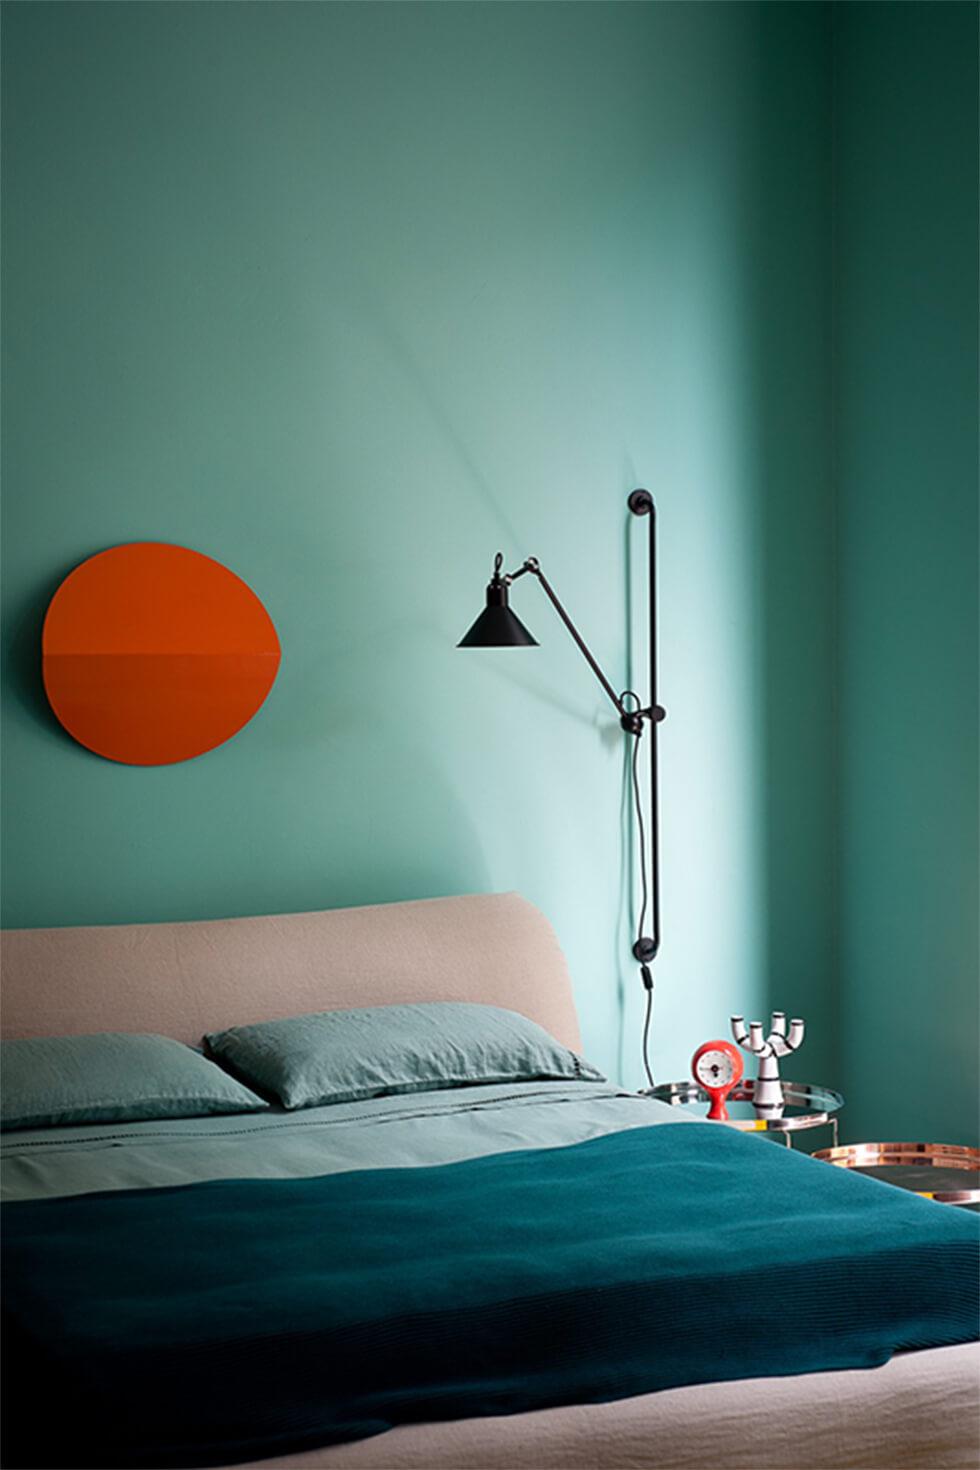 Teal bedroom with contrasting circular orange wall art and teal bedding